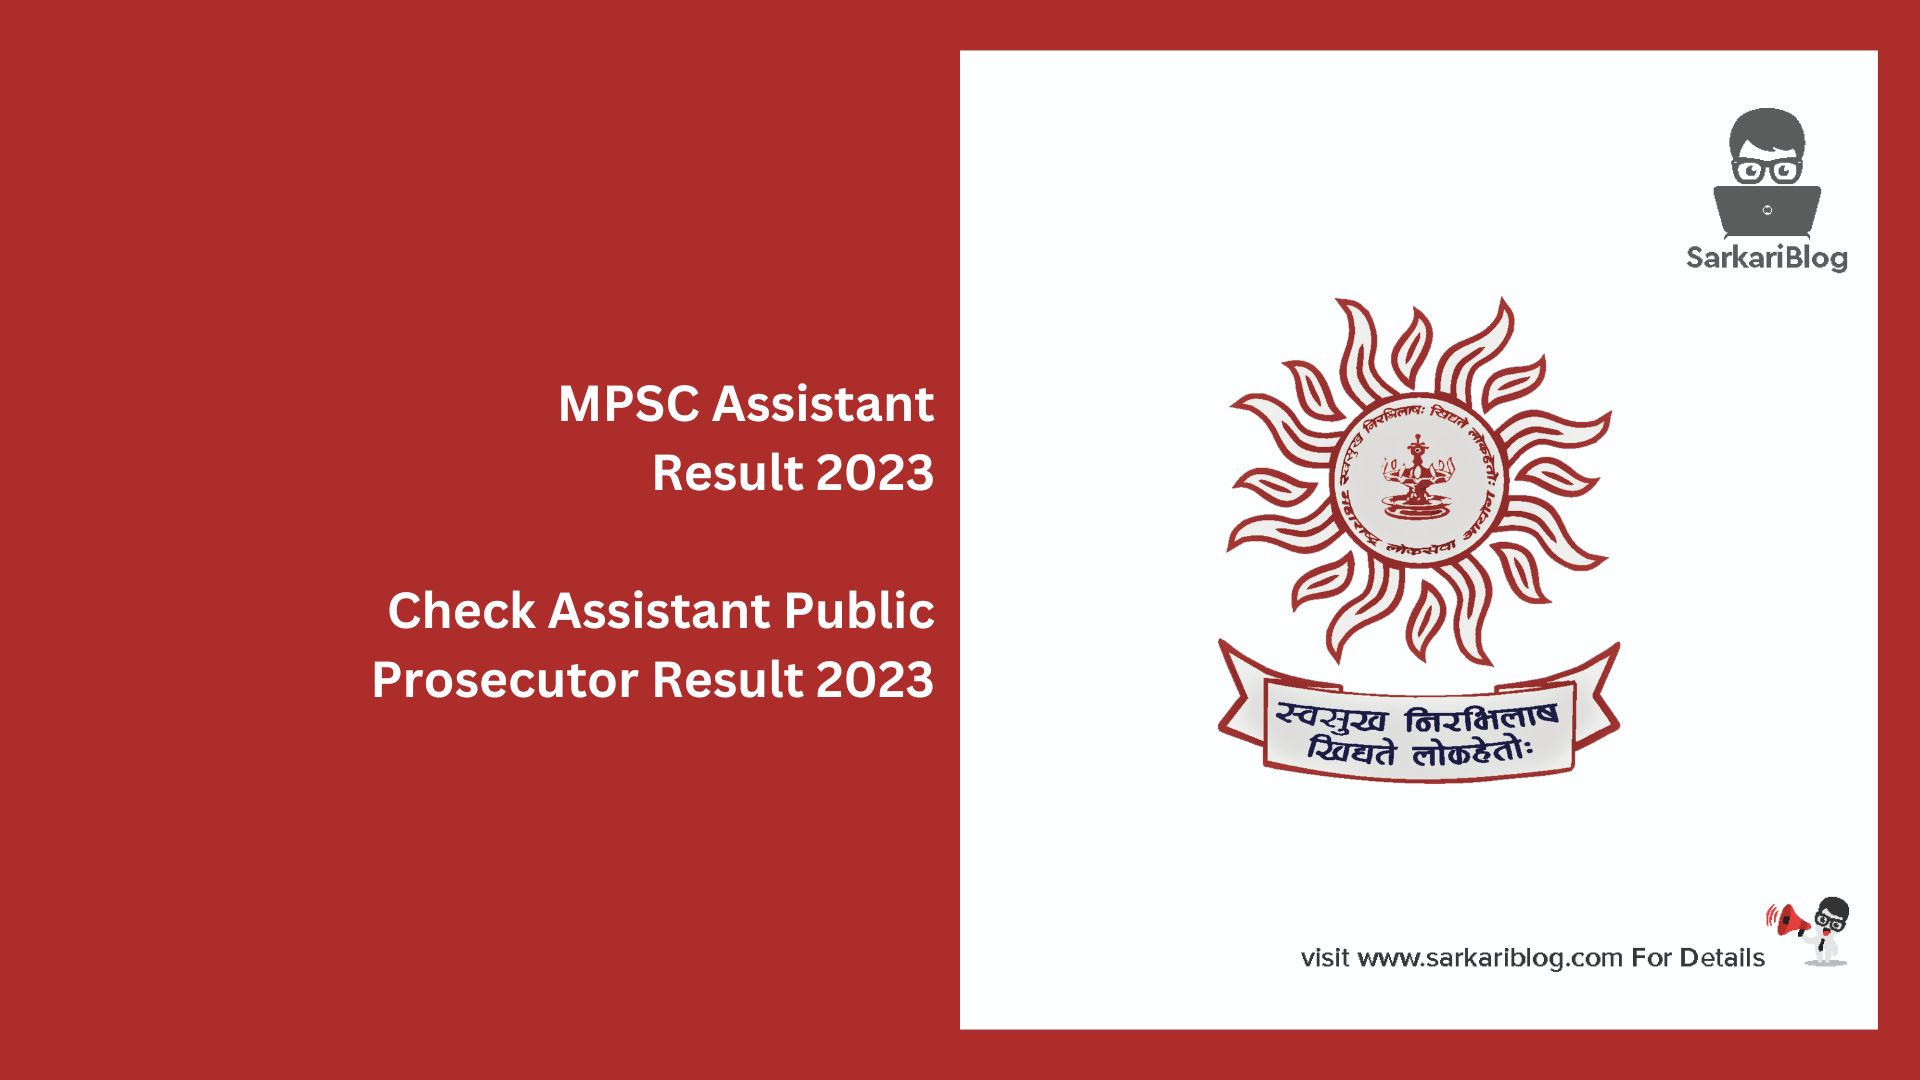 MPSC Assistant Result 2023